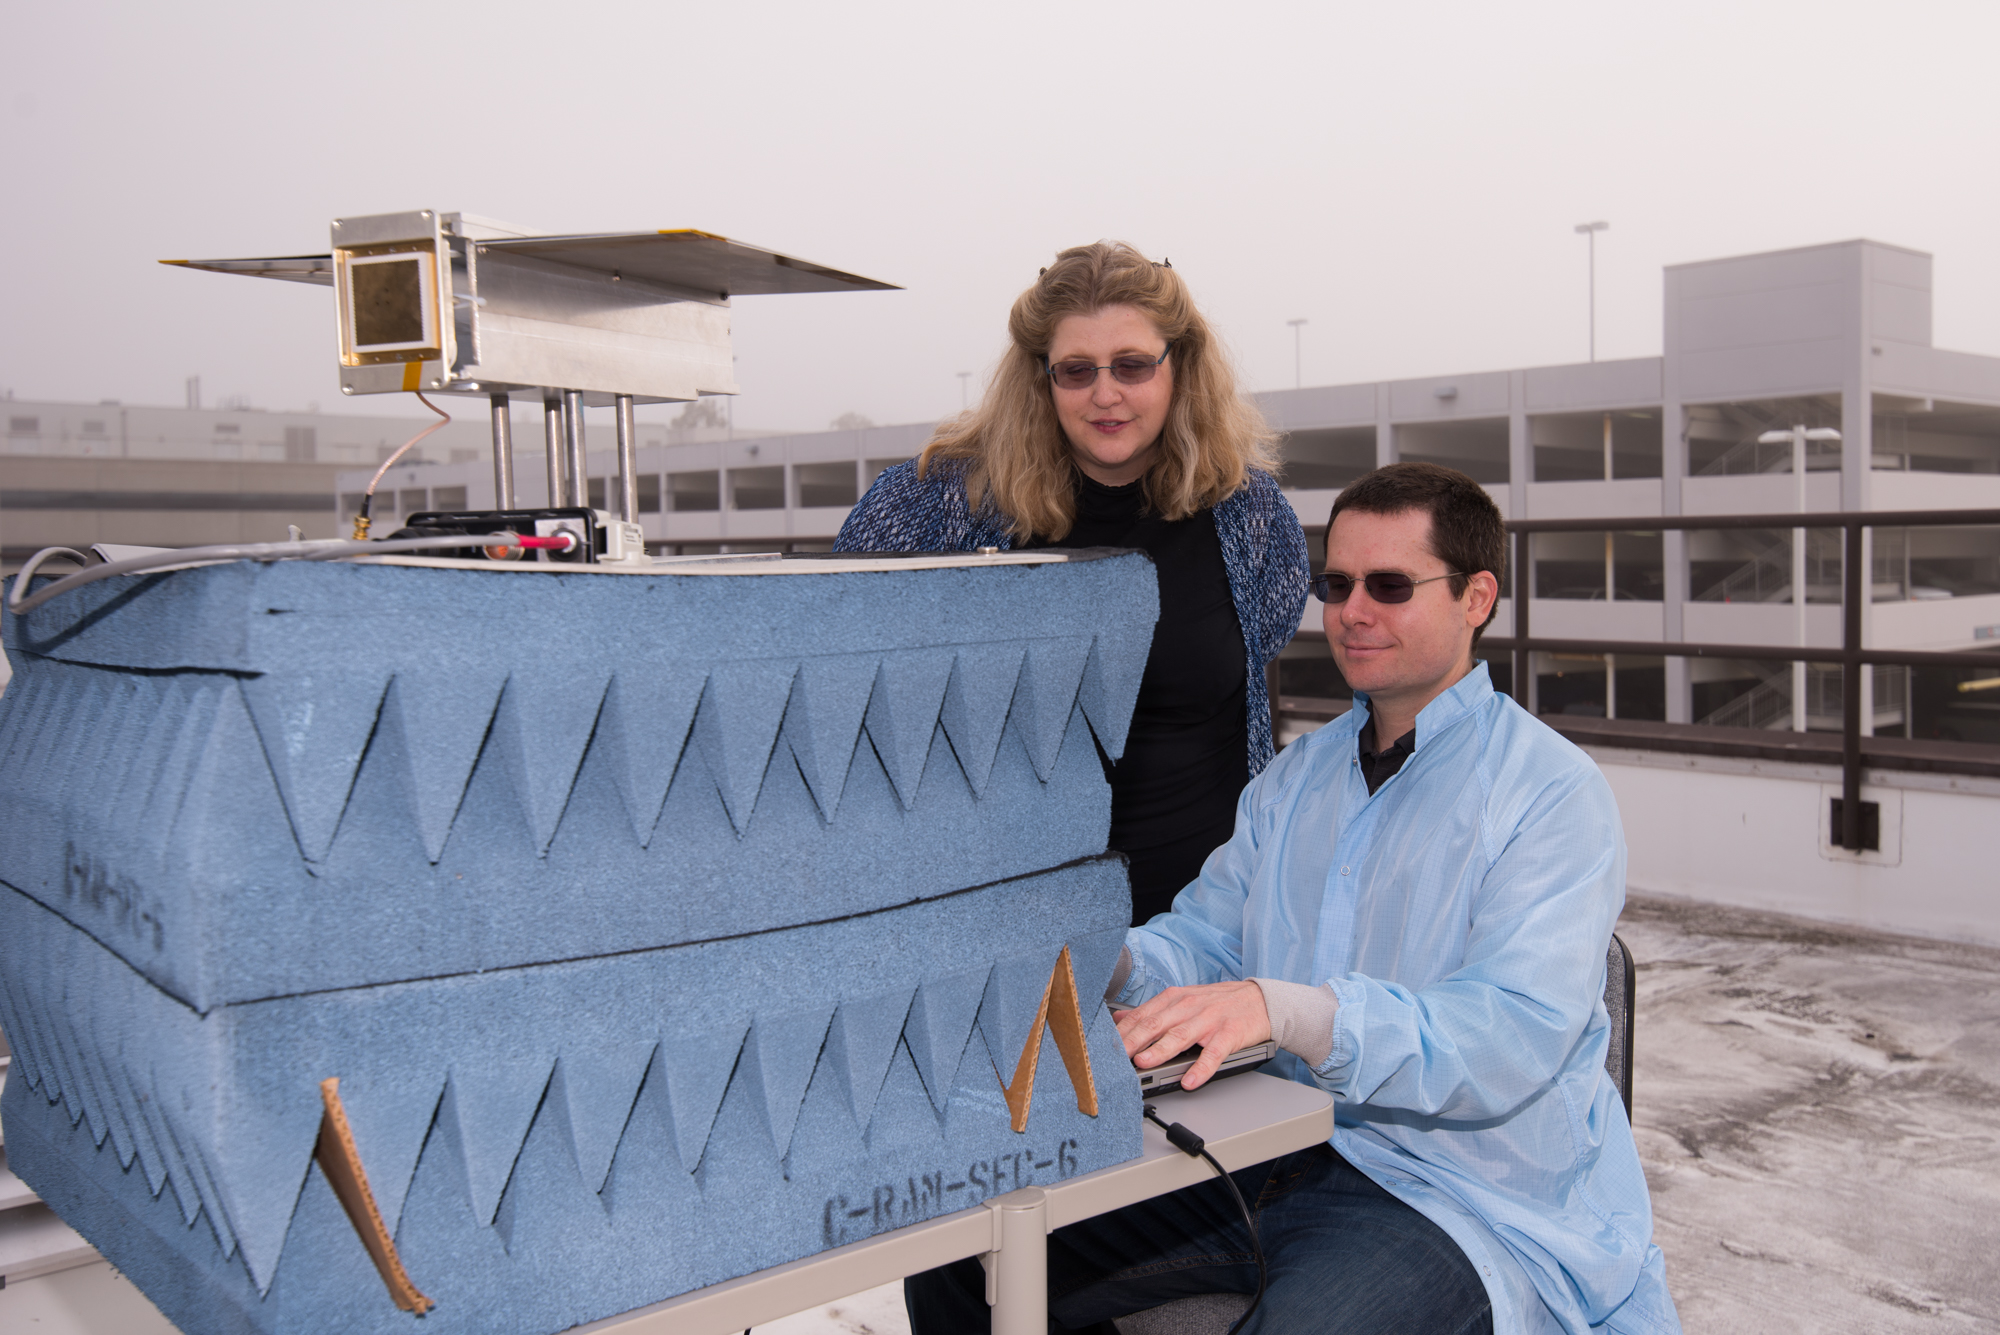 Research scientist Dr. Rebecca Bishop, left, and design engineer Steve Bielat of The Aerospace Corporation